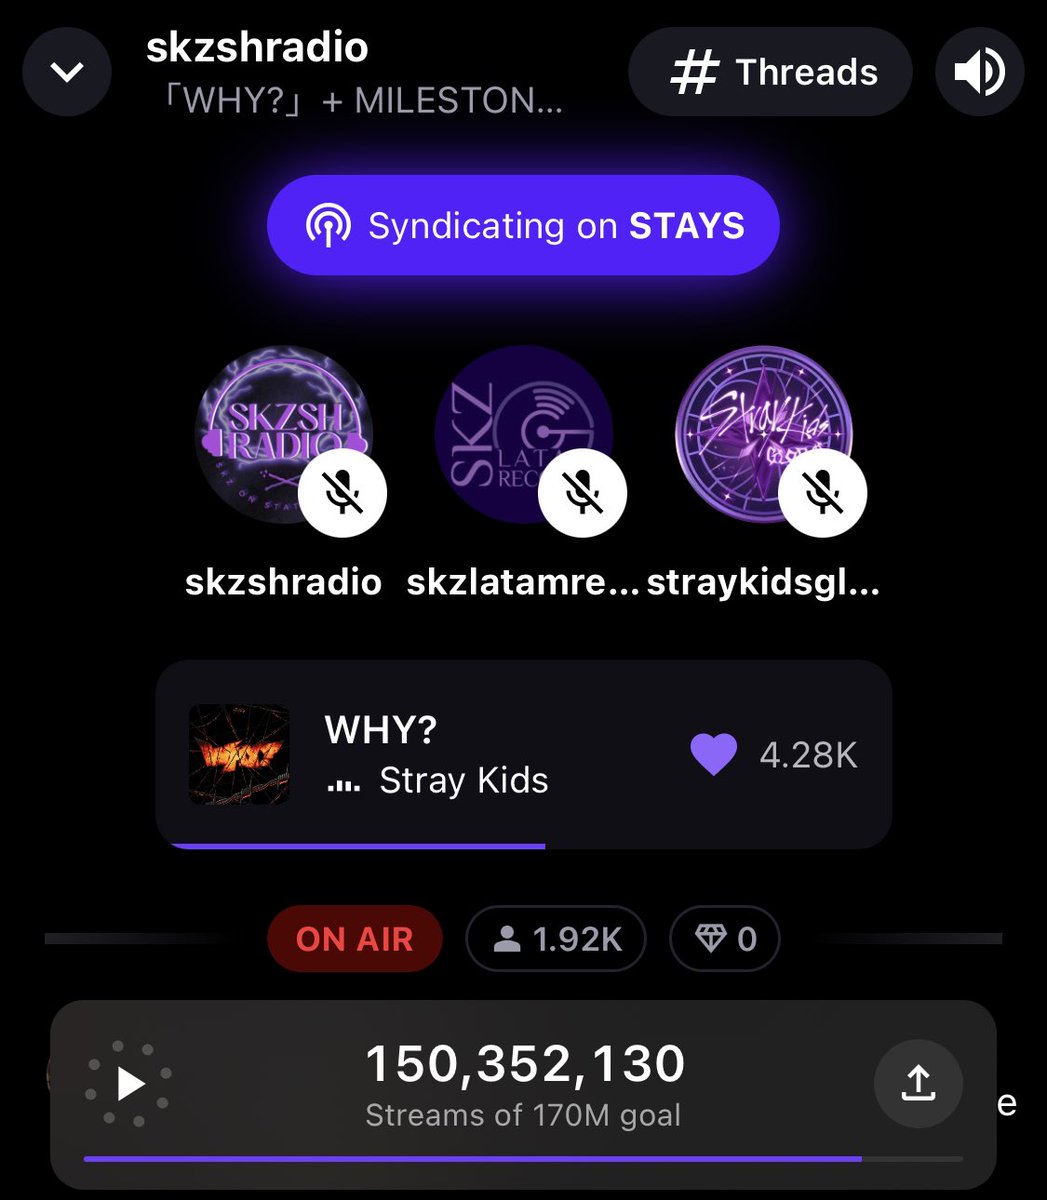 🥹1.92K STAYs singing STAY WITH MEEEEEEE~ So beautiful! 2K next! Time to break records Join us STAY! Our beloved @jstaystm & JSTAYs are here~ 🎤 Sing along with DJ🥟, @StrayKidsGlobal & @SkzLatamRecords ONAIR right now 📻 stationhead.com/skzshradio 🎶 tinyurl.com/skzshradio